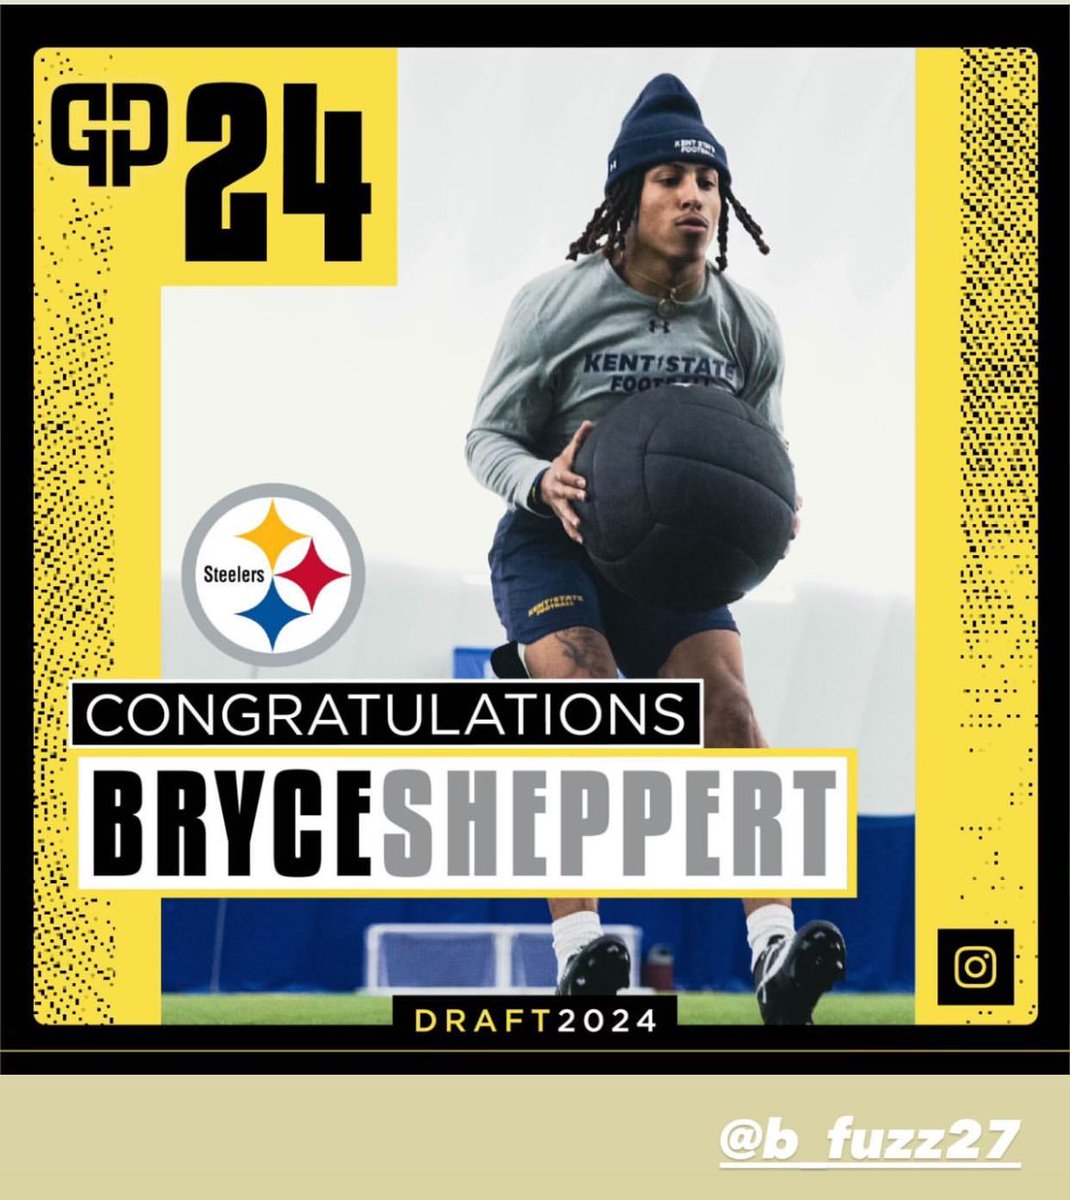 Congratulations to Class of 2018 SMF Grad, Bryce Sheppert on earning an invite to Steelers Minicamp! We couldn't be more excited for you! #BulldogPrideCitiesWide #OnceABulldogAlwaysABulldog  Read more here:  buff.ly/4dhhKAN